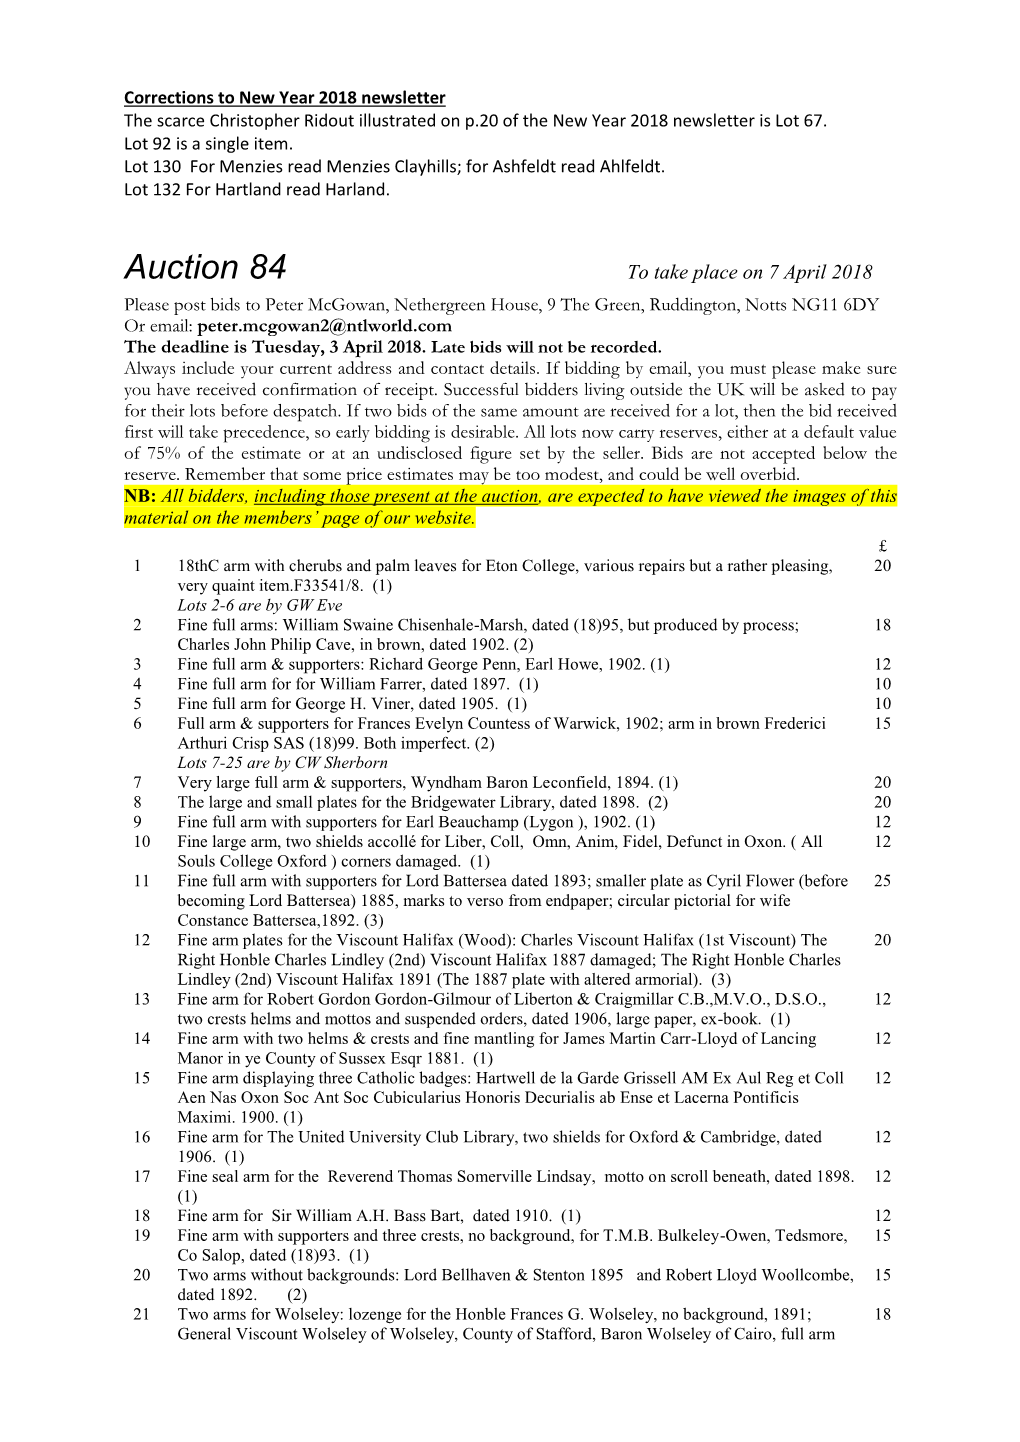 Auction 84 to Take Place on 7 April 2018